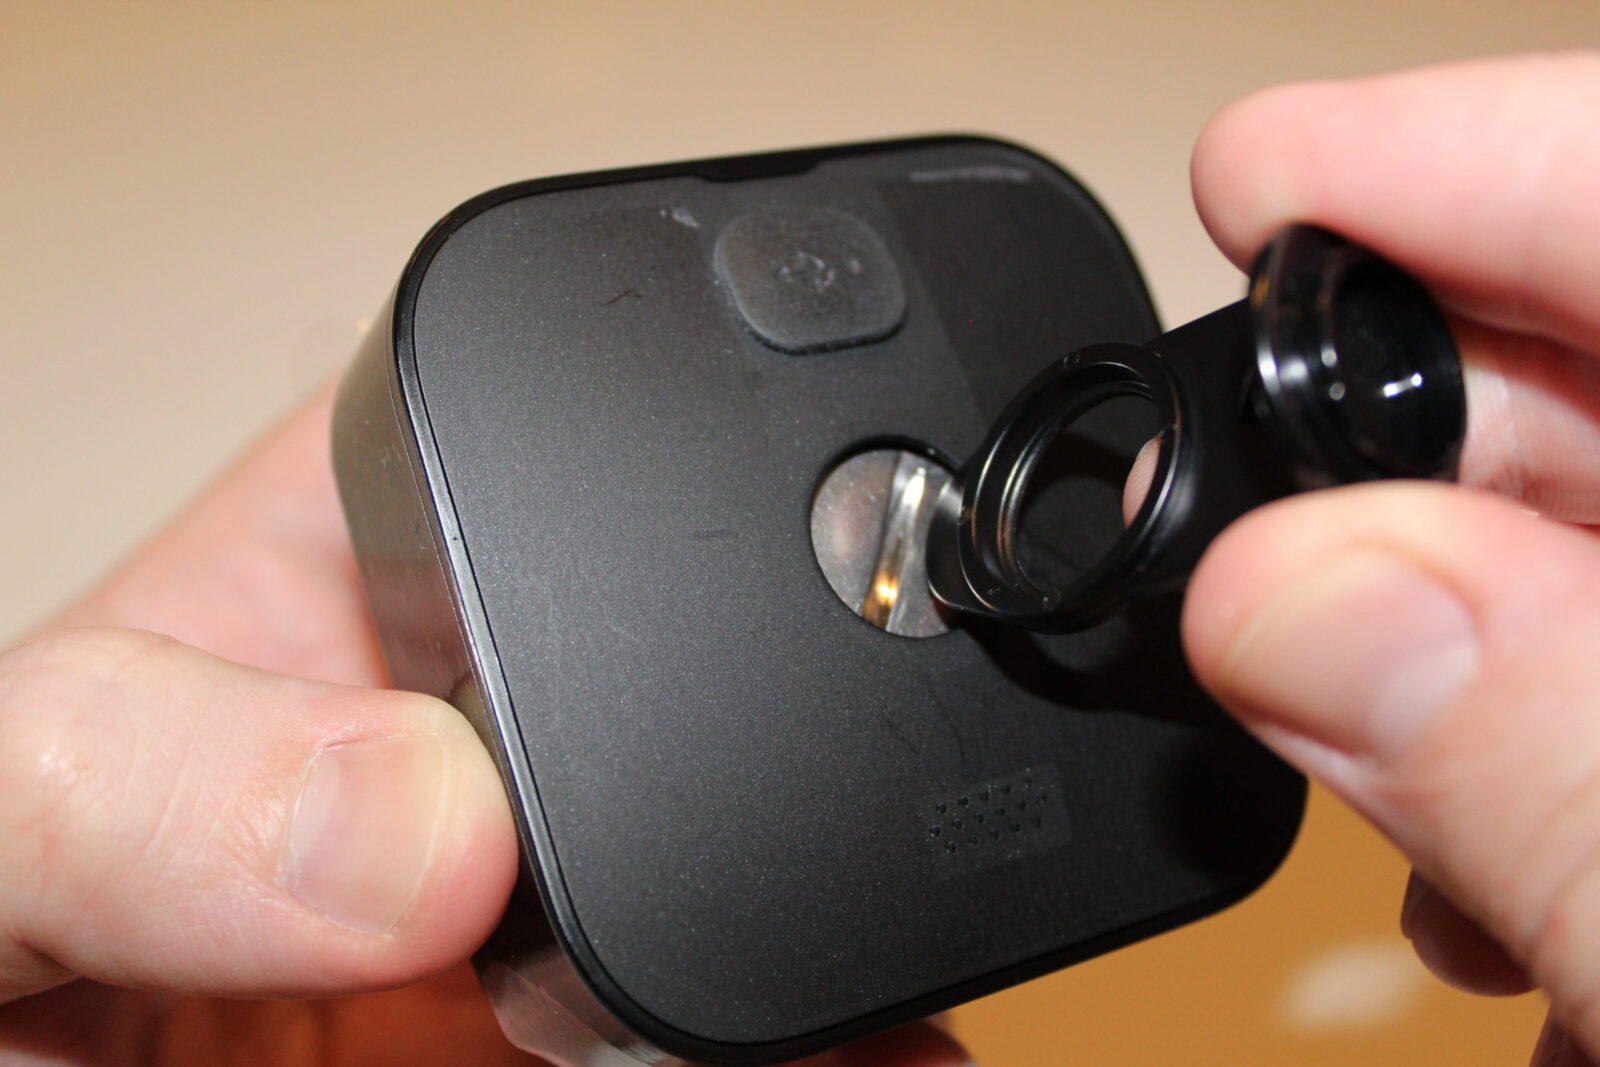 How to Set Up Your Blink Smart Cameras